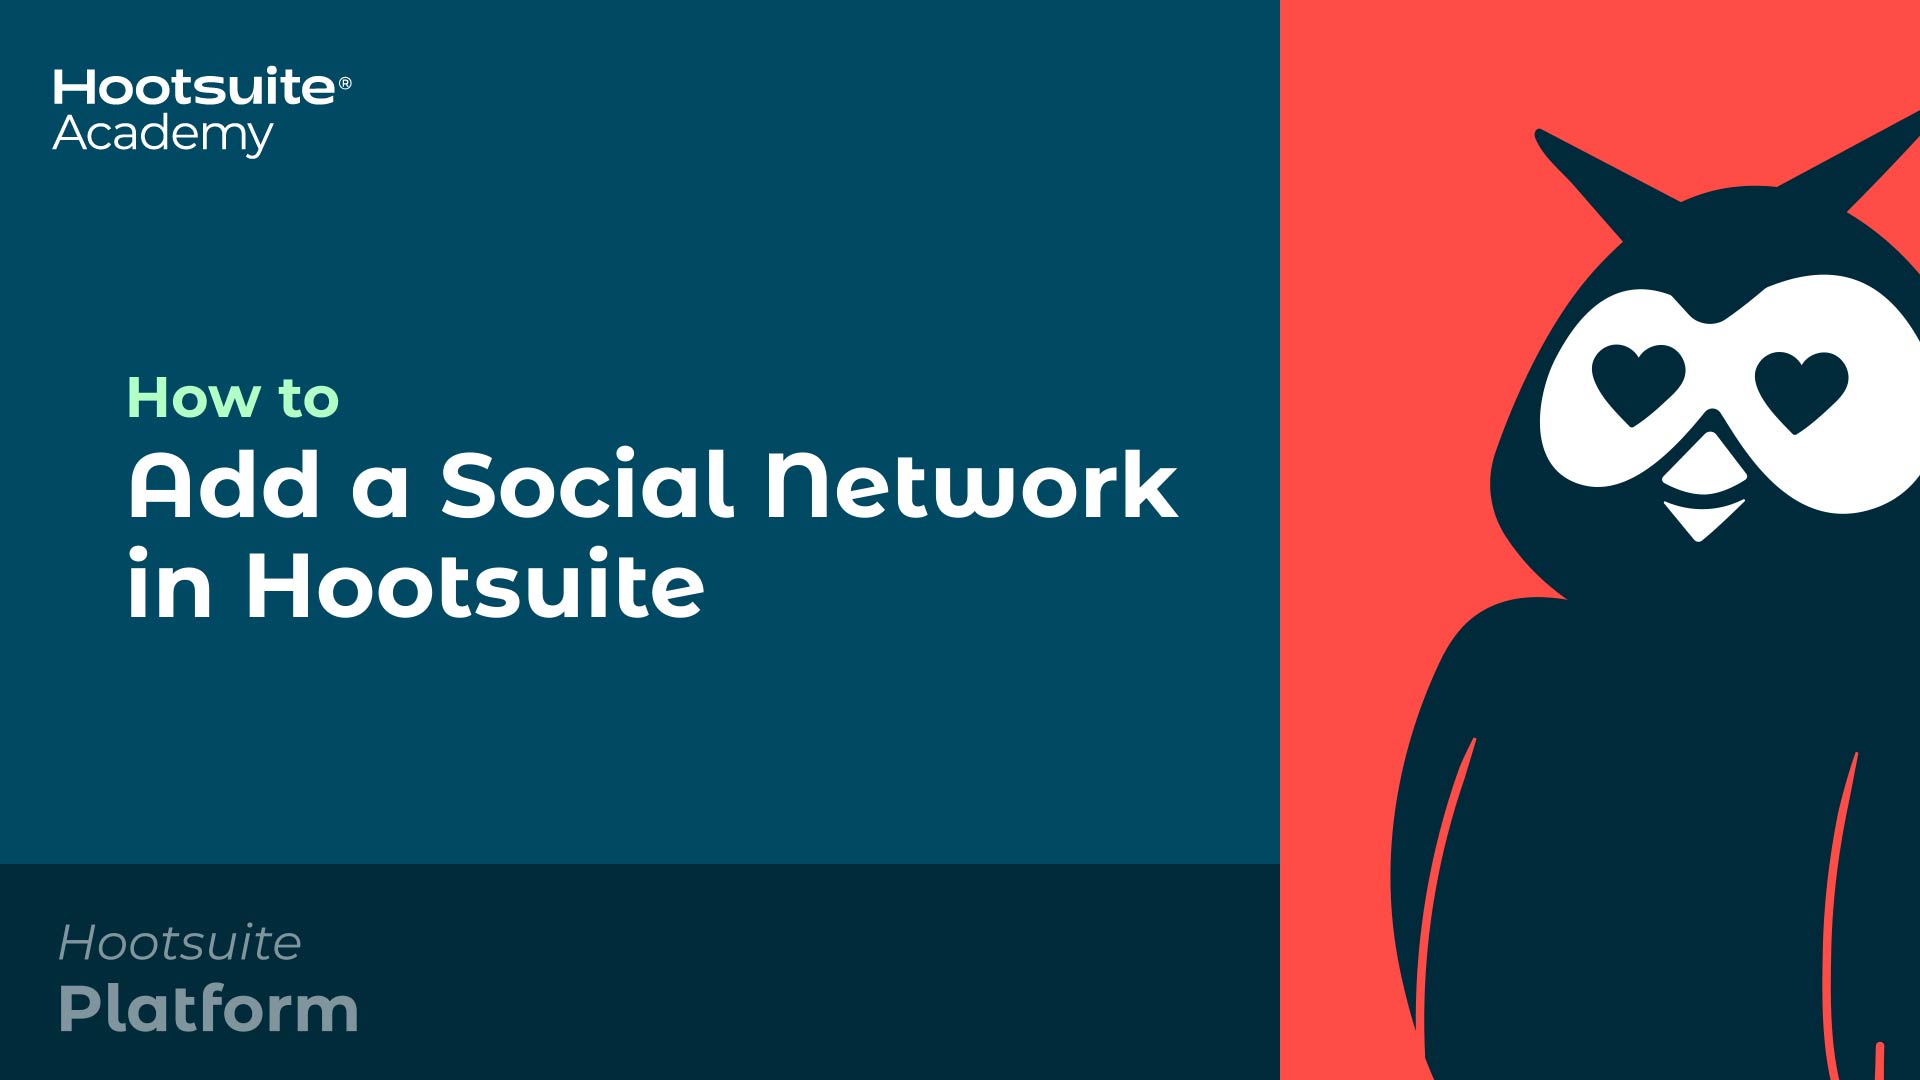 Video: How to add a social network in Hootsuite.